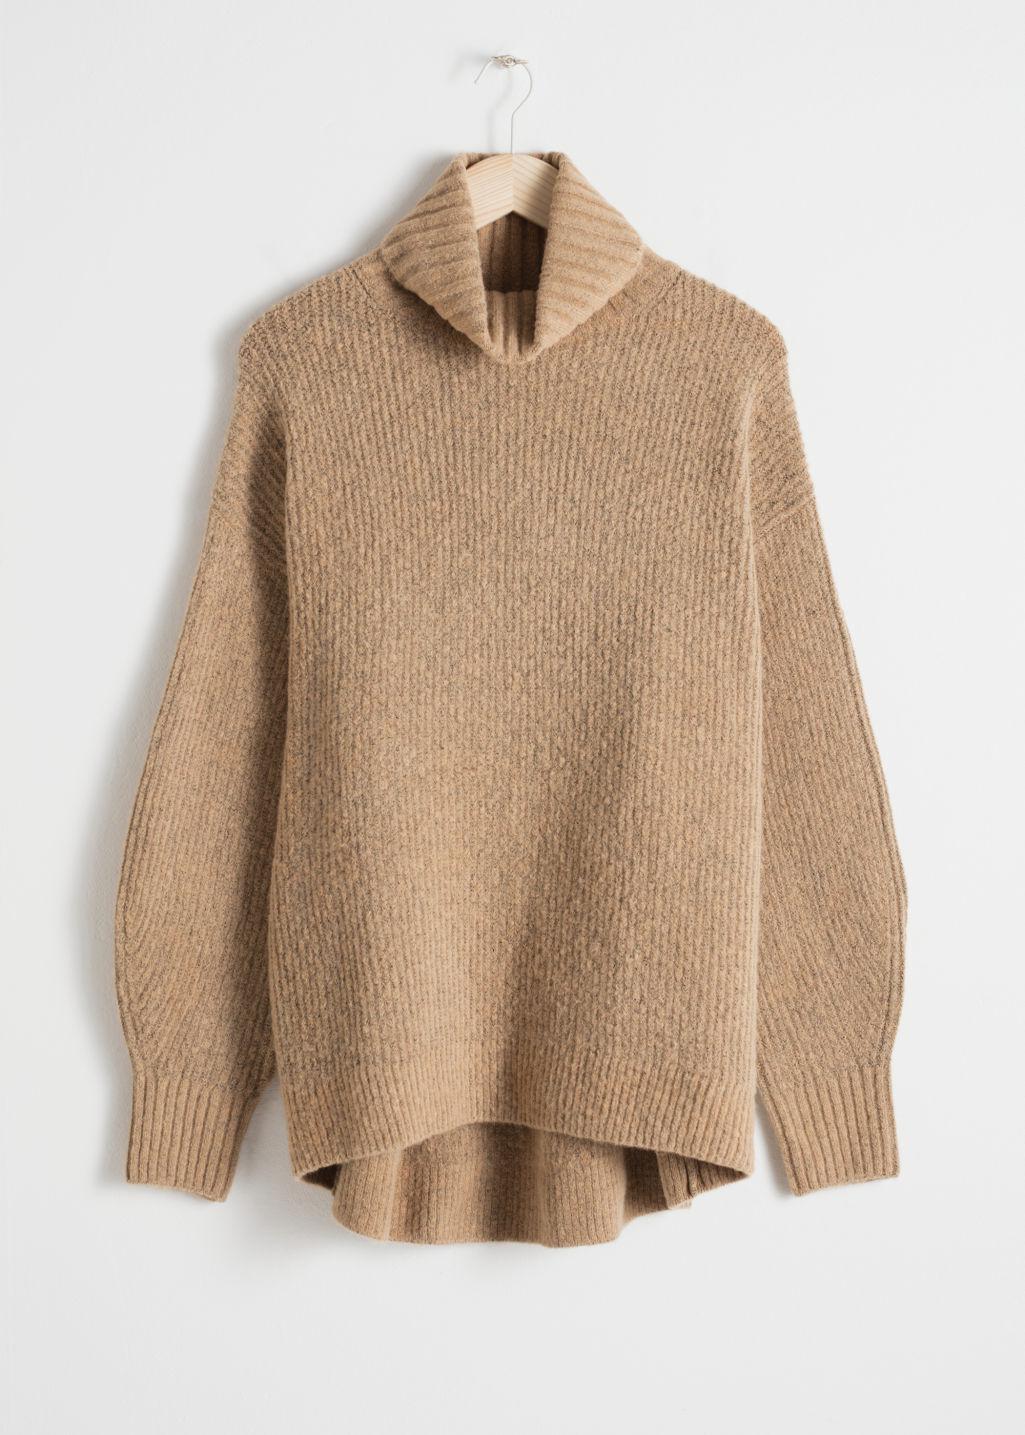 & Other Stories Oversized Turtleneck Sweater in Beige (Natural) - Lyst